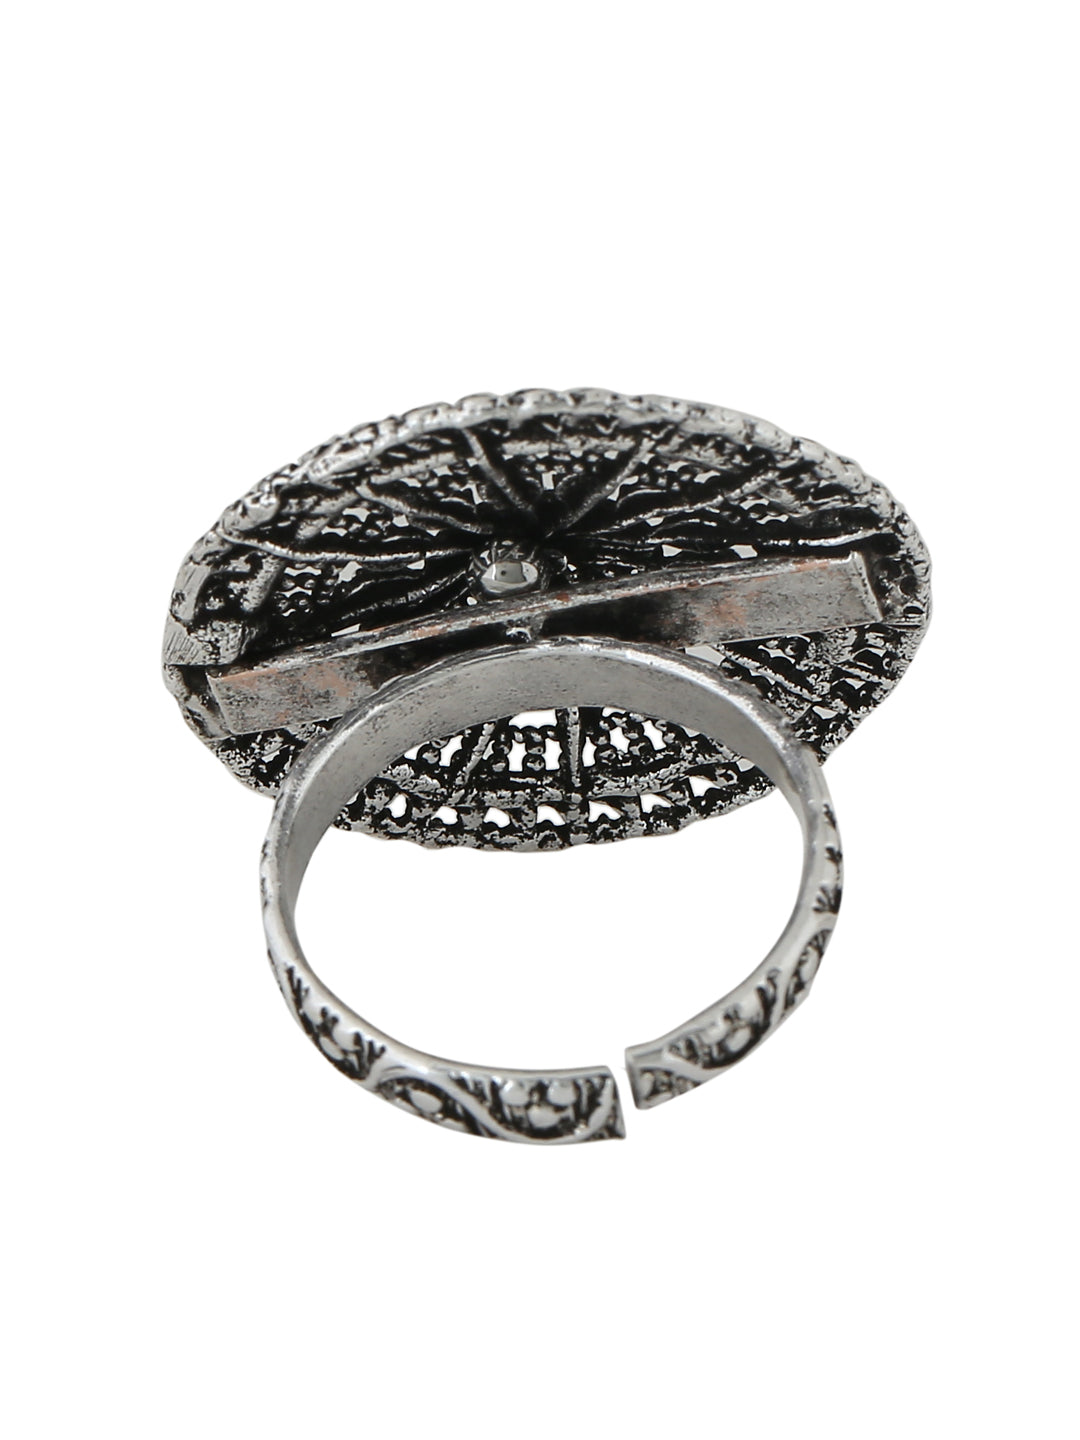 Women's Oxidised Silver Plated Adjustable Finger Ring - NVR